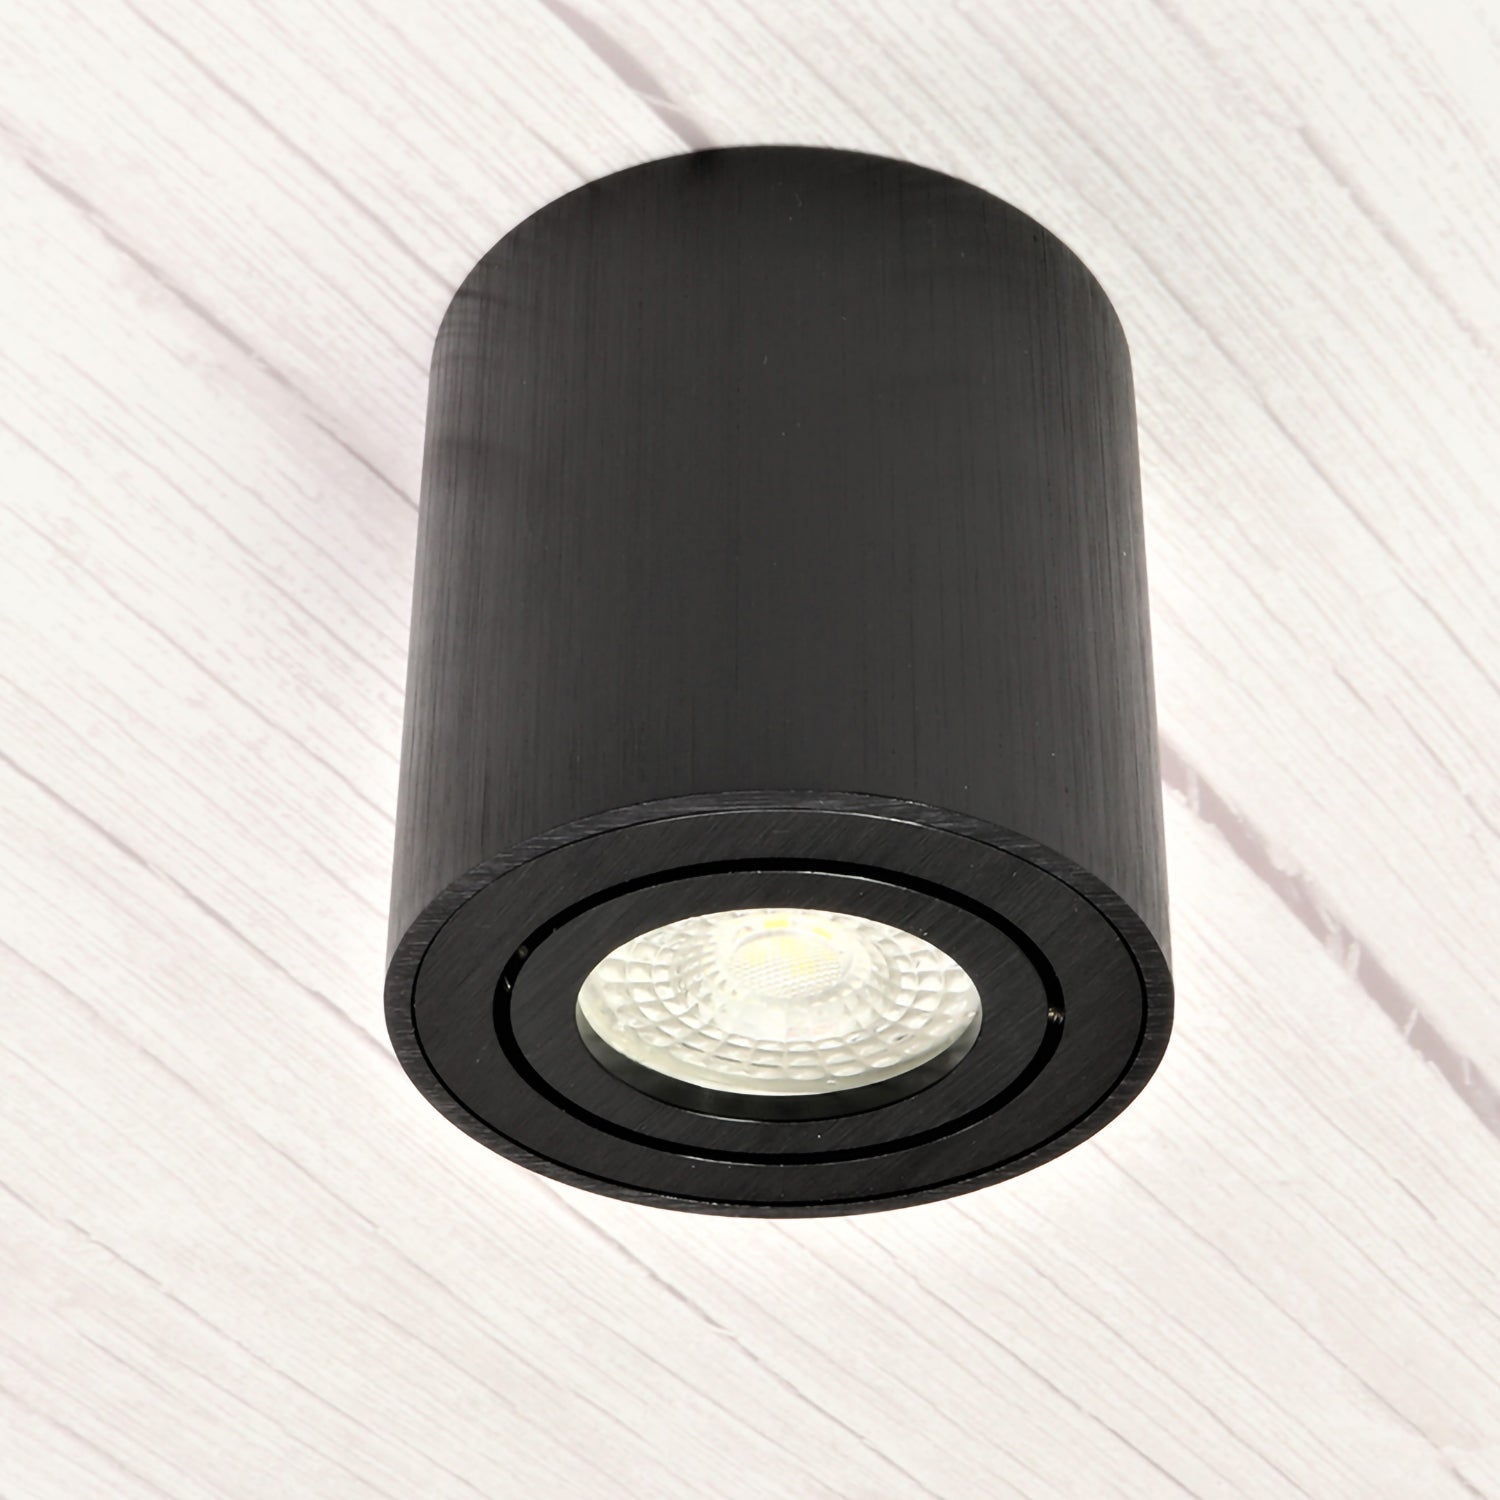 LED surface-mounted spotlight Dimmable novoom Round Black Milano – GU10 230V ceiling 6.2W Surface-mounted light light